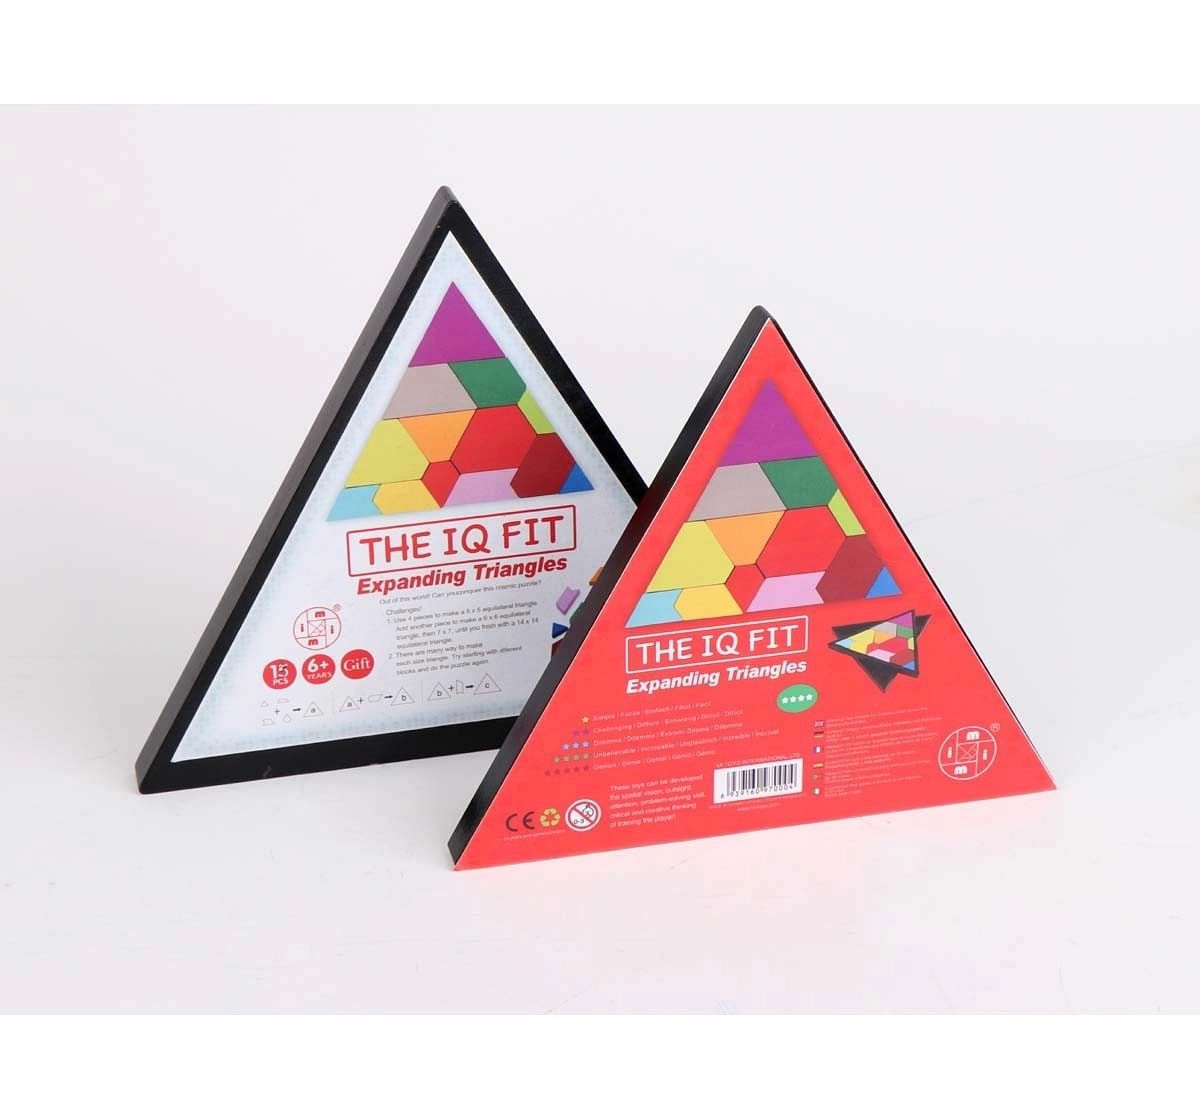 Mimi IQ Fit Expanding Triangles Games for Kids Age 6Y+